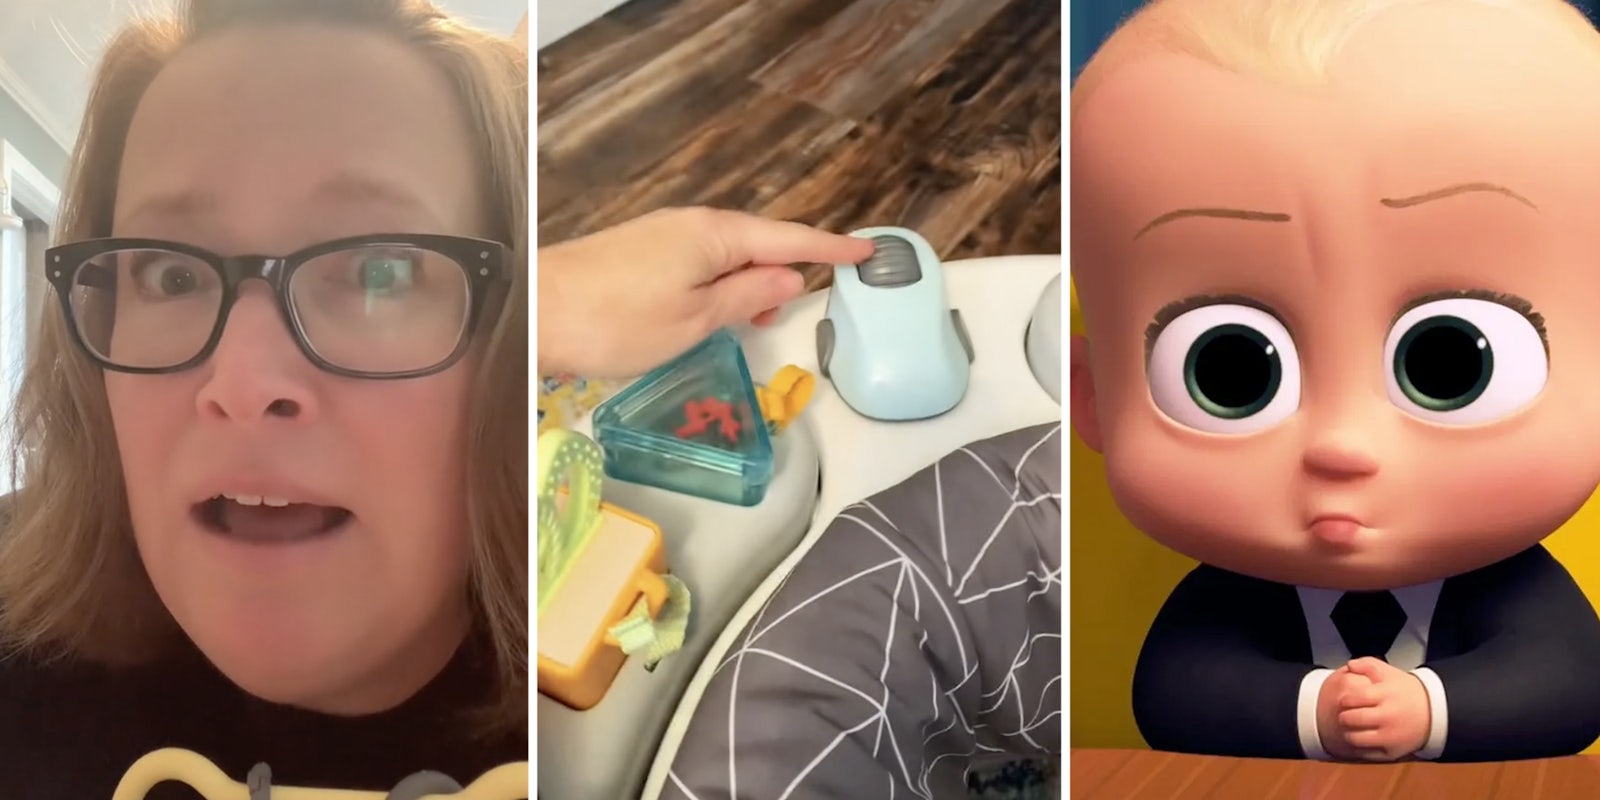 Woman(l), Infant toy(c), Boss Baby(r)